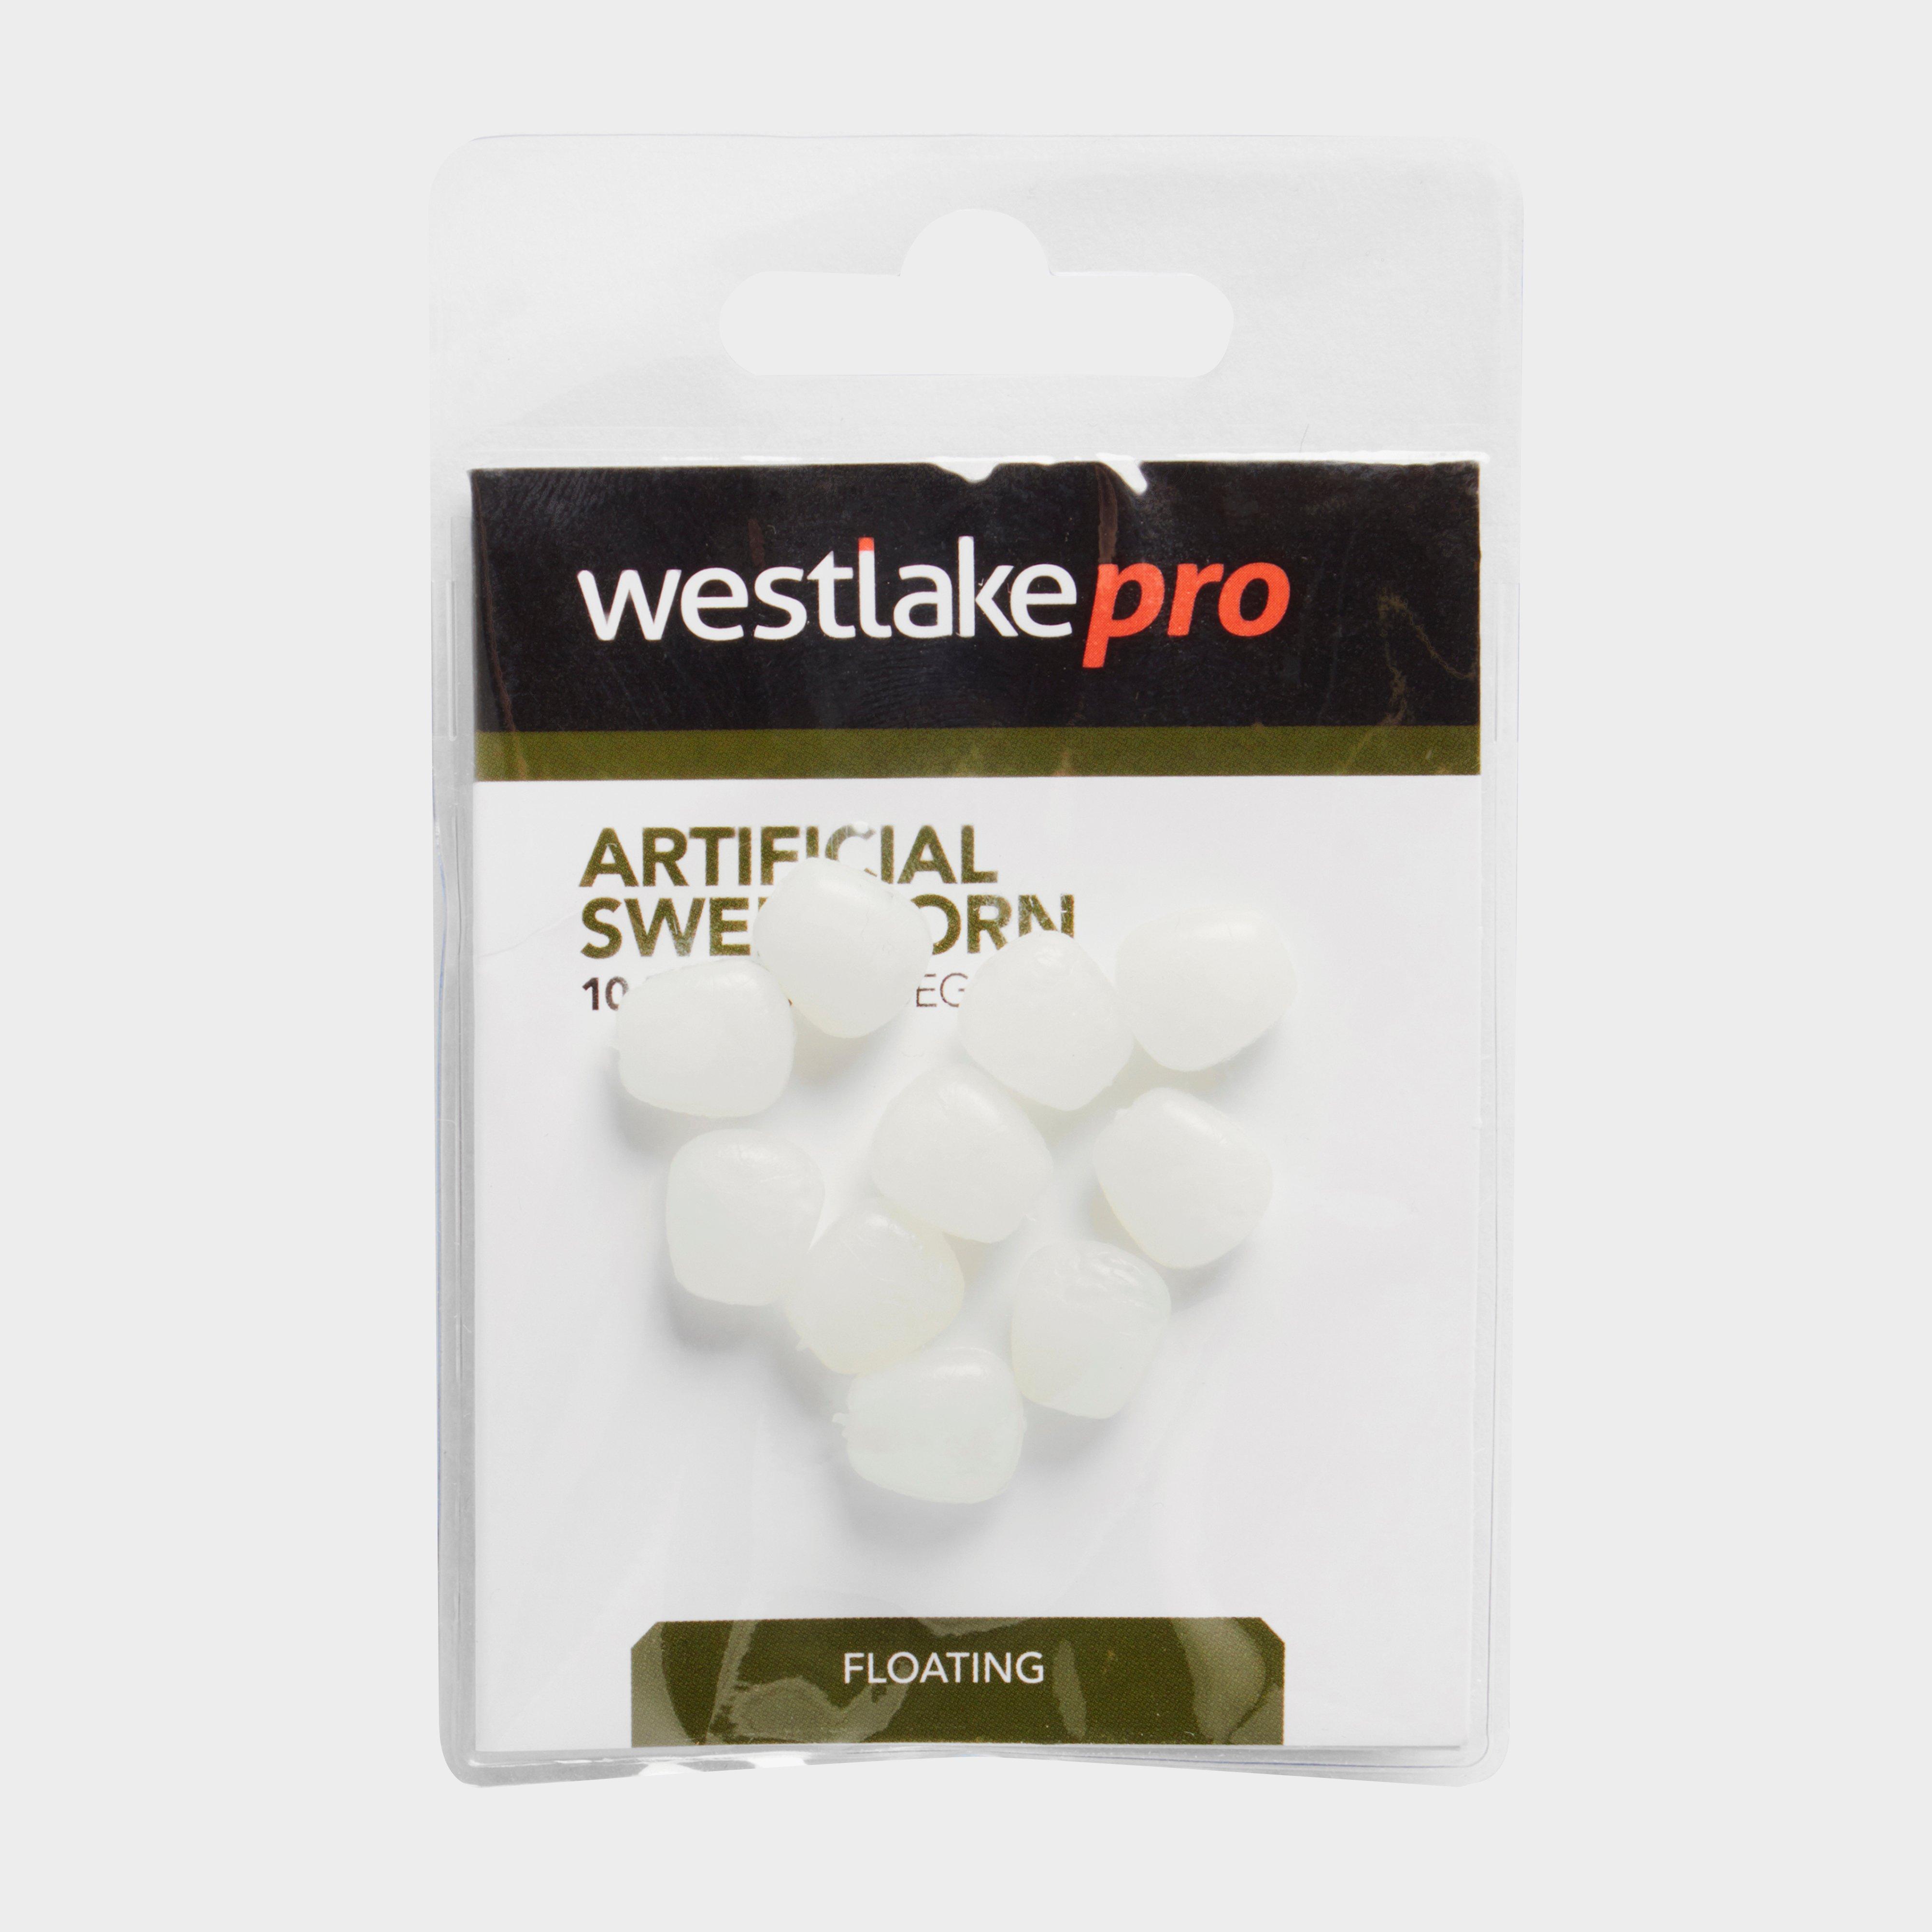 New Westlake Casters Floating 25Pc